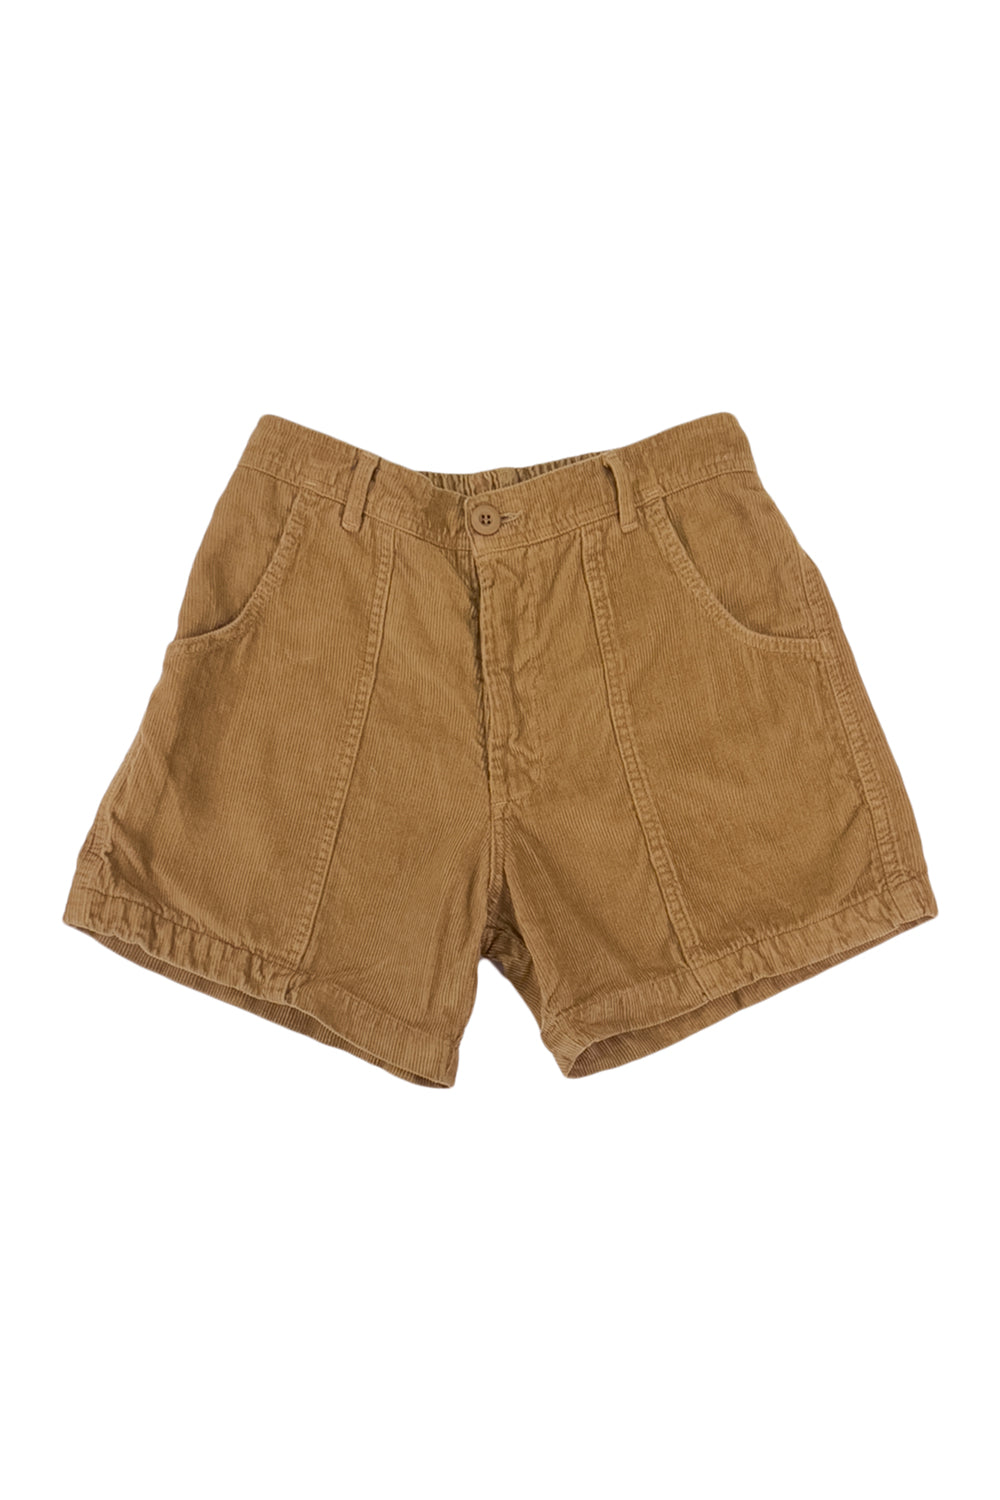 Cabuya Cord Short | Jungmaven Hemp Clothing & Accessories / Color: Coyote